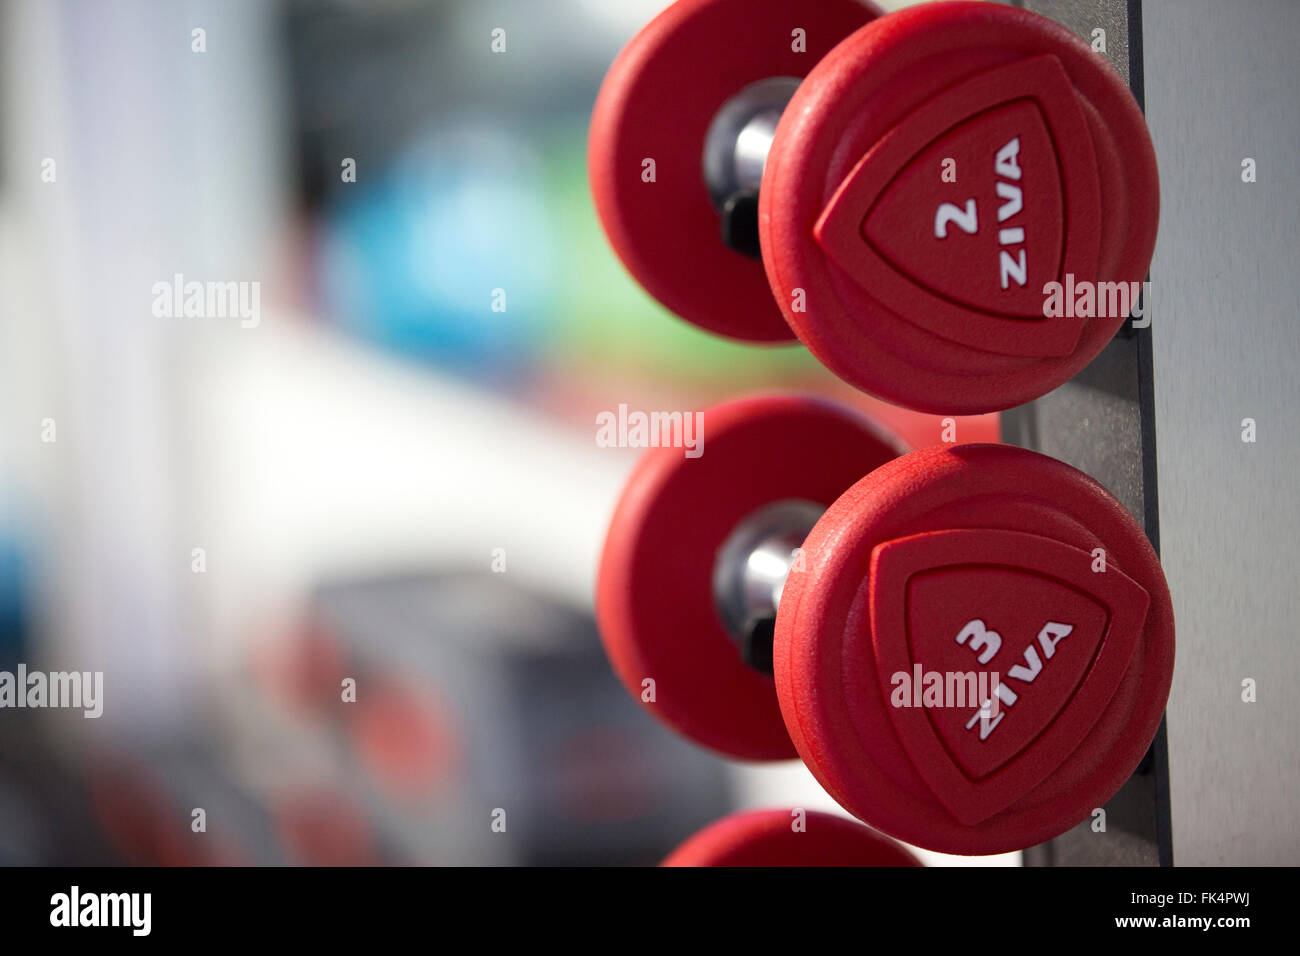 weights in a gym Stock Photo